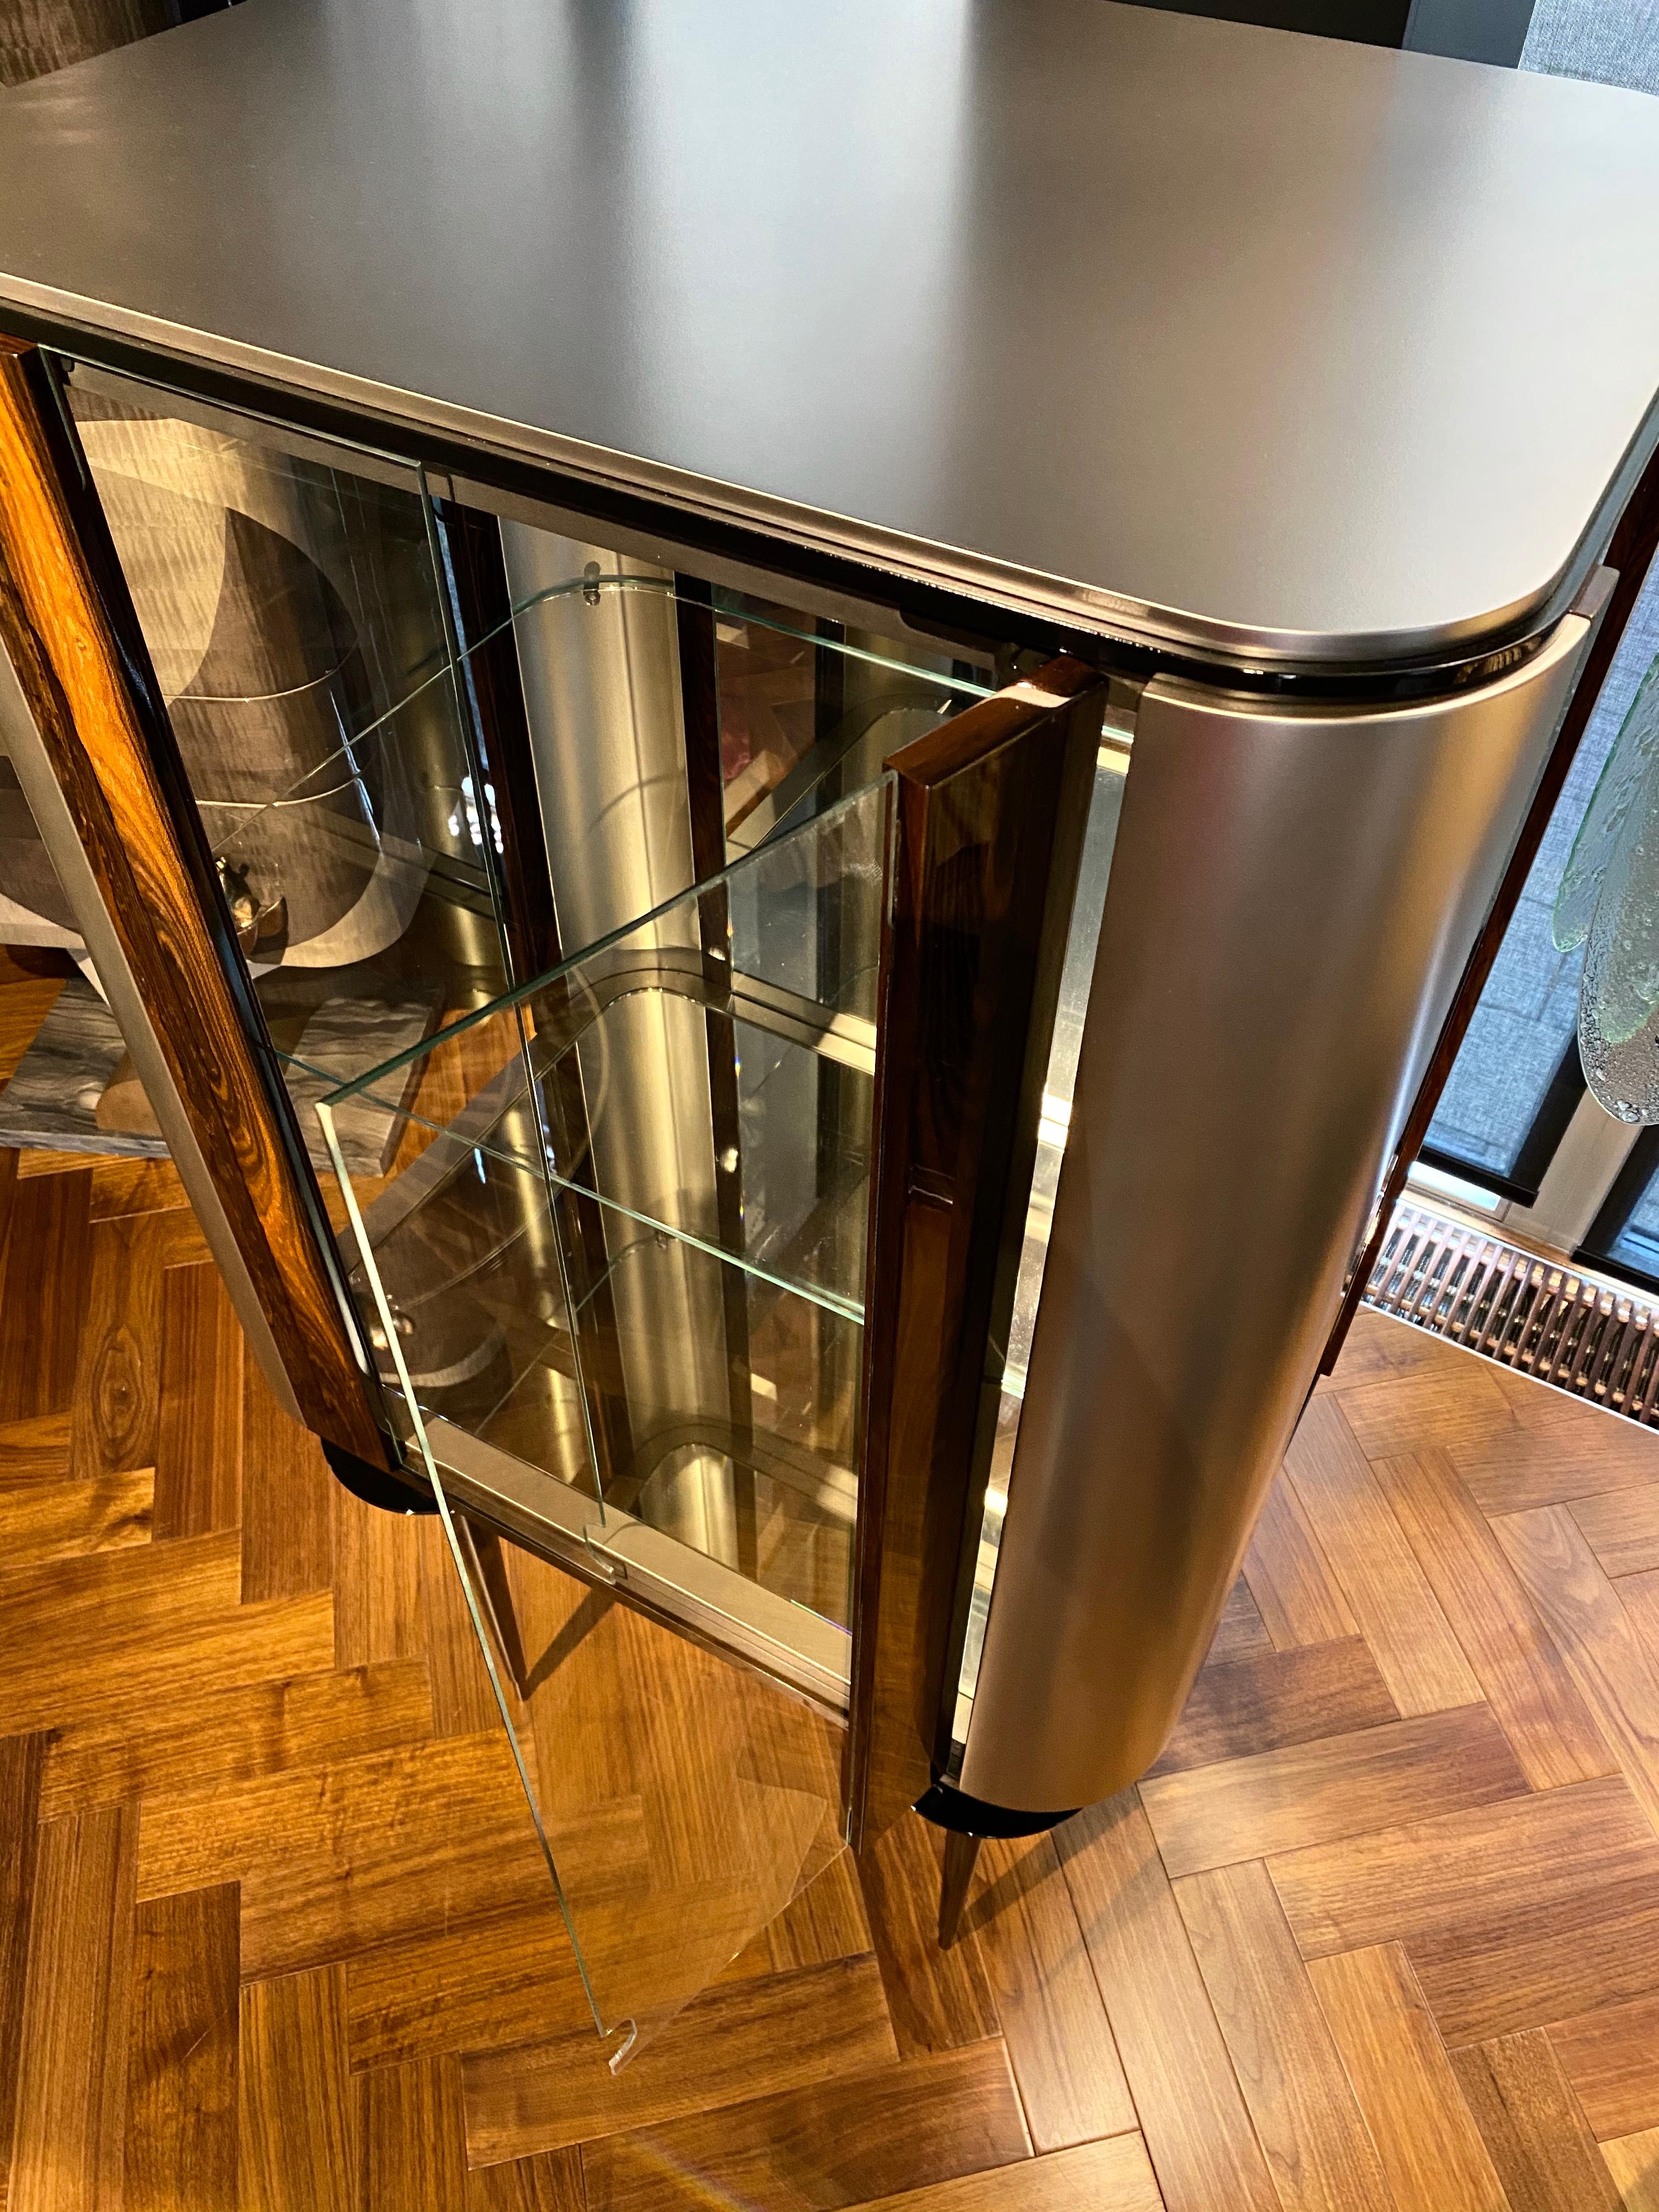 Lithuanian 'Silver Crane' Modern Glass Cabinet with Ziricote Veneer Inlays from Egli Design For Sale